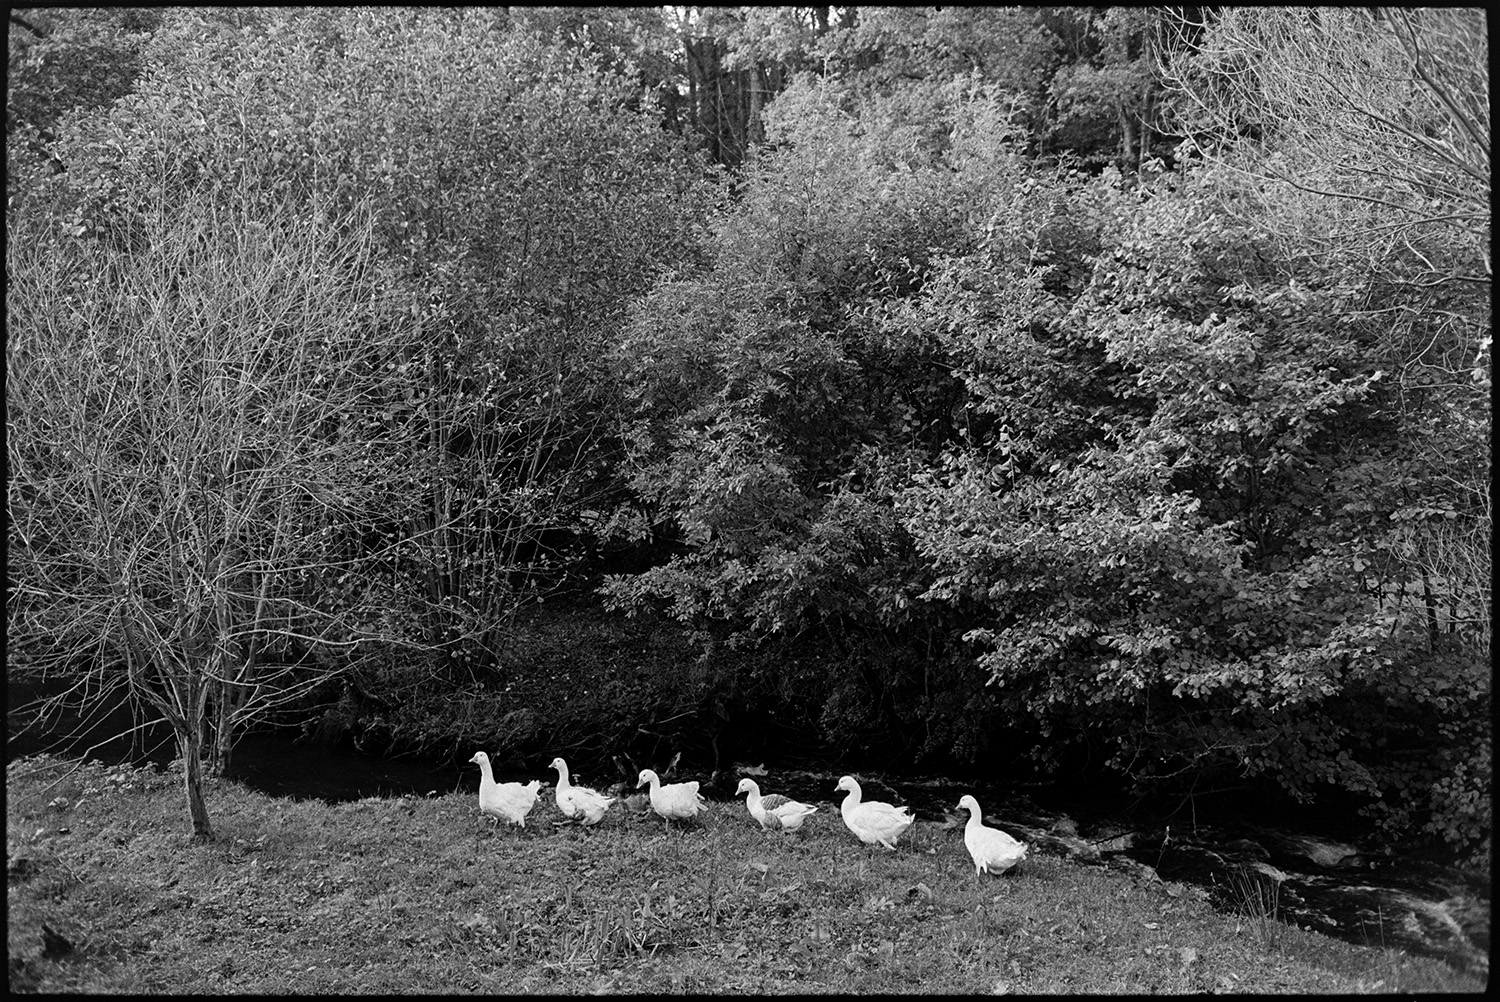 Row of geese, by and in stream. 
[Six geese walking in a line along the bank of a stream at Millhams, Dolton.]